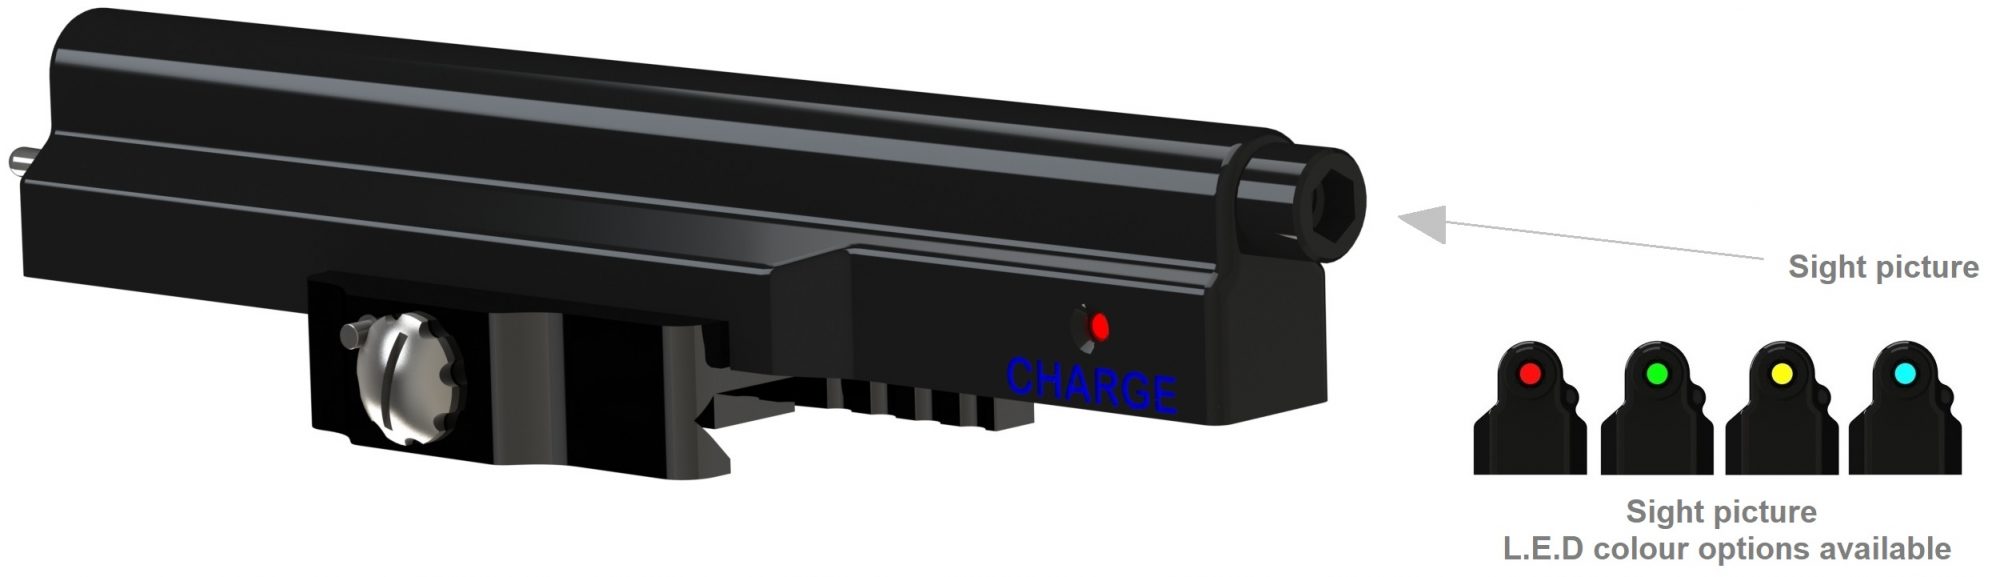 led sight picatinny rail showing sight picture and colour options